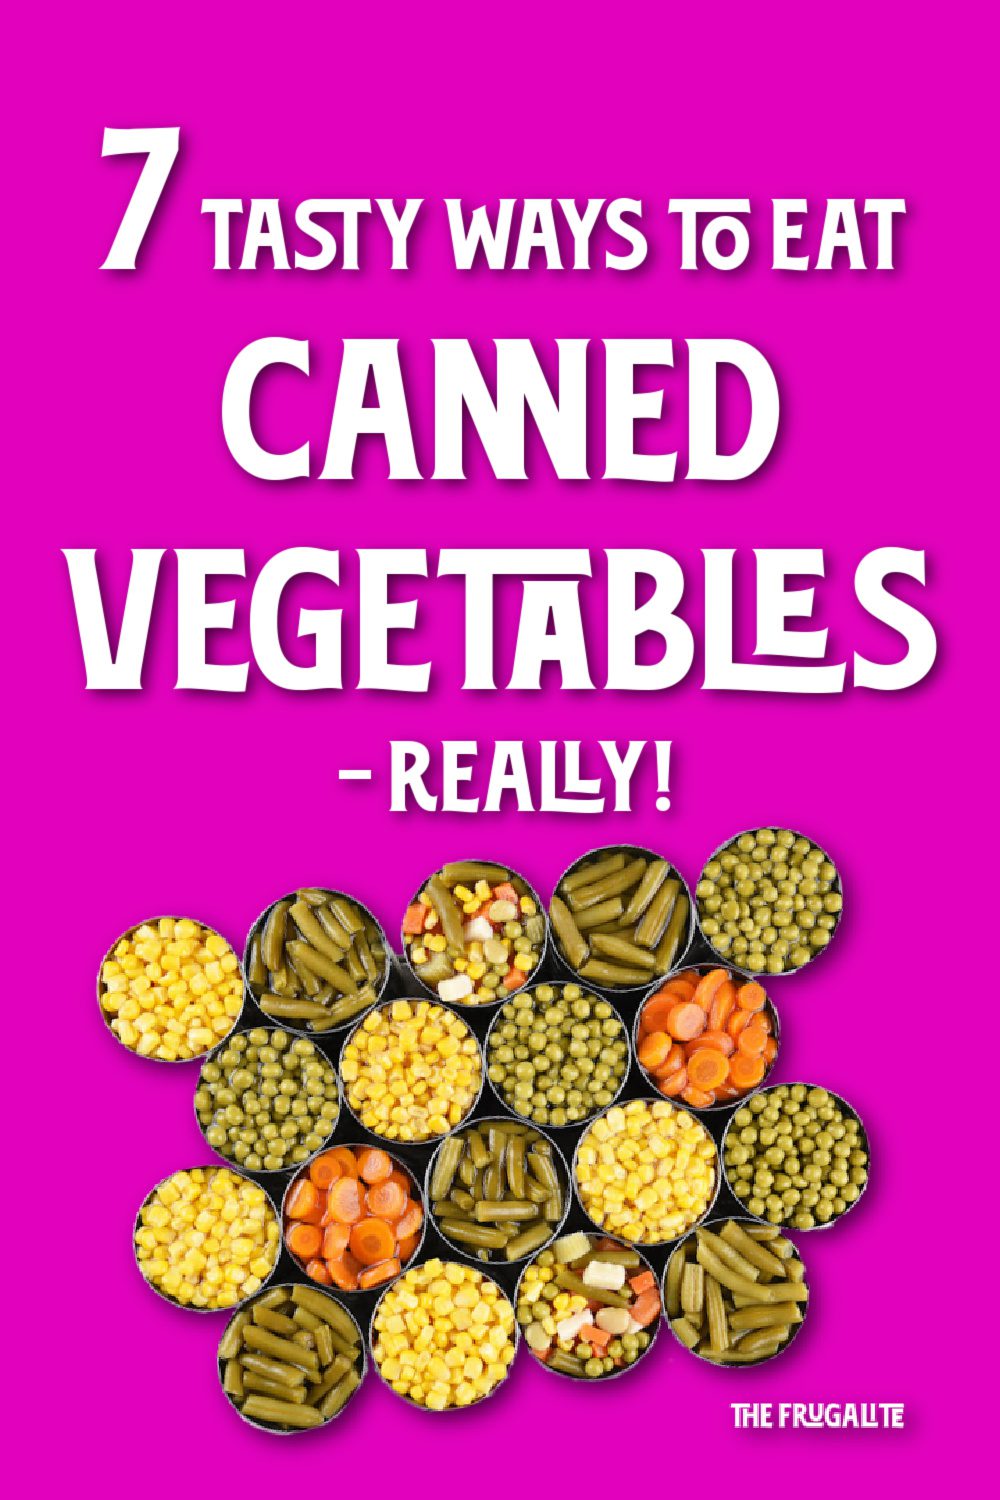 7 Tasty Ways to Eat Canned Vegetables - Really!